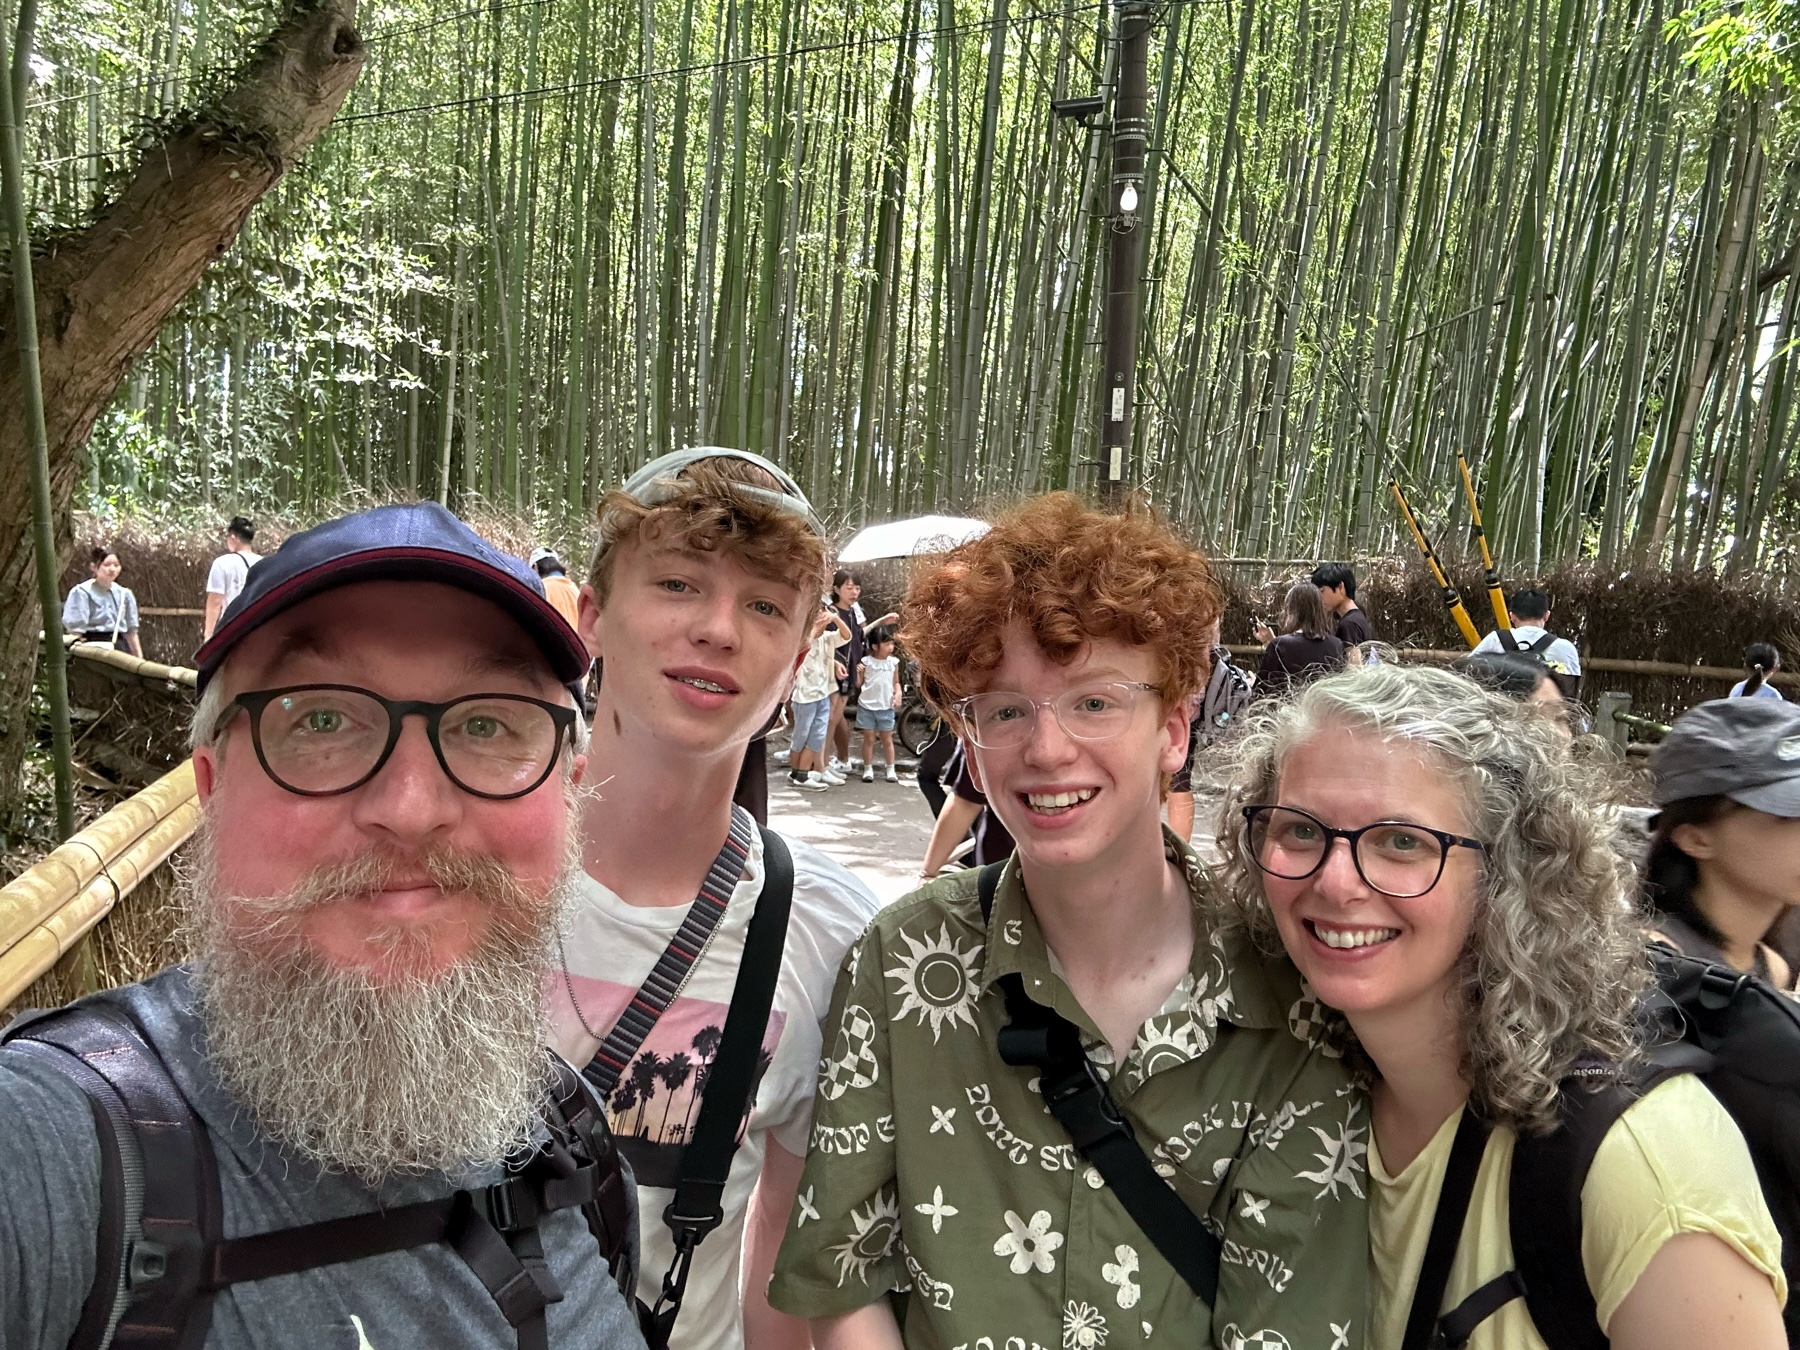 Me and my family doing a selfie in front of the bamboo